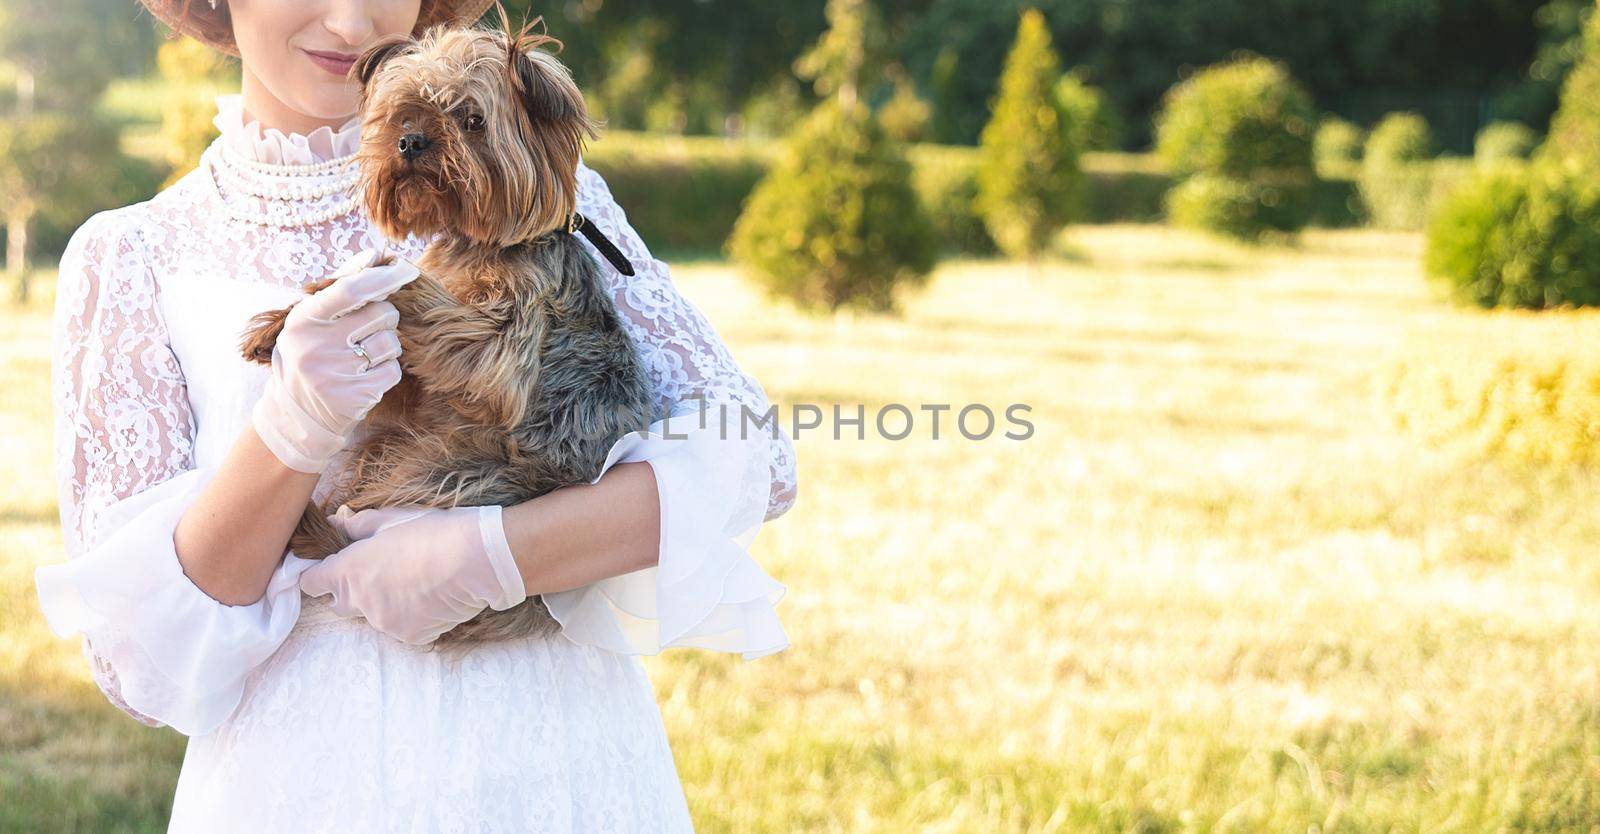 Retro portrait of a beautiful woman holding Yorkshire terrier by Nickstock